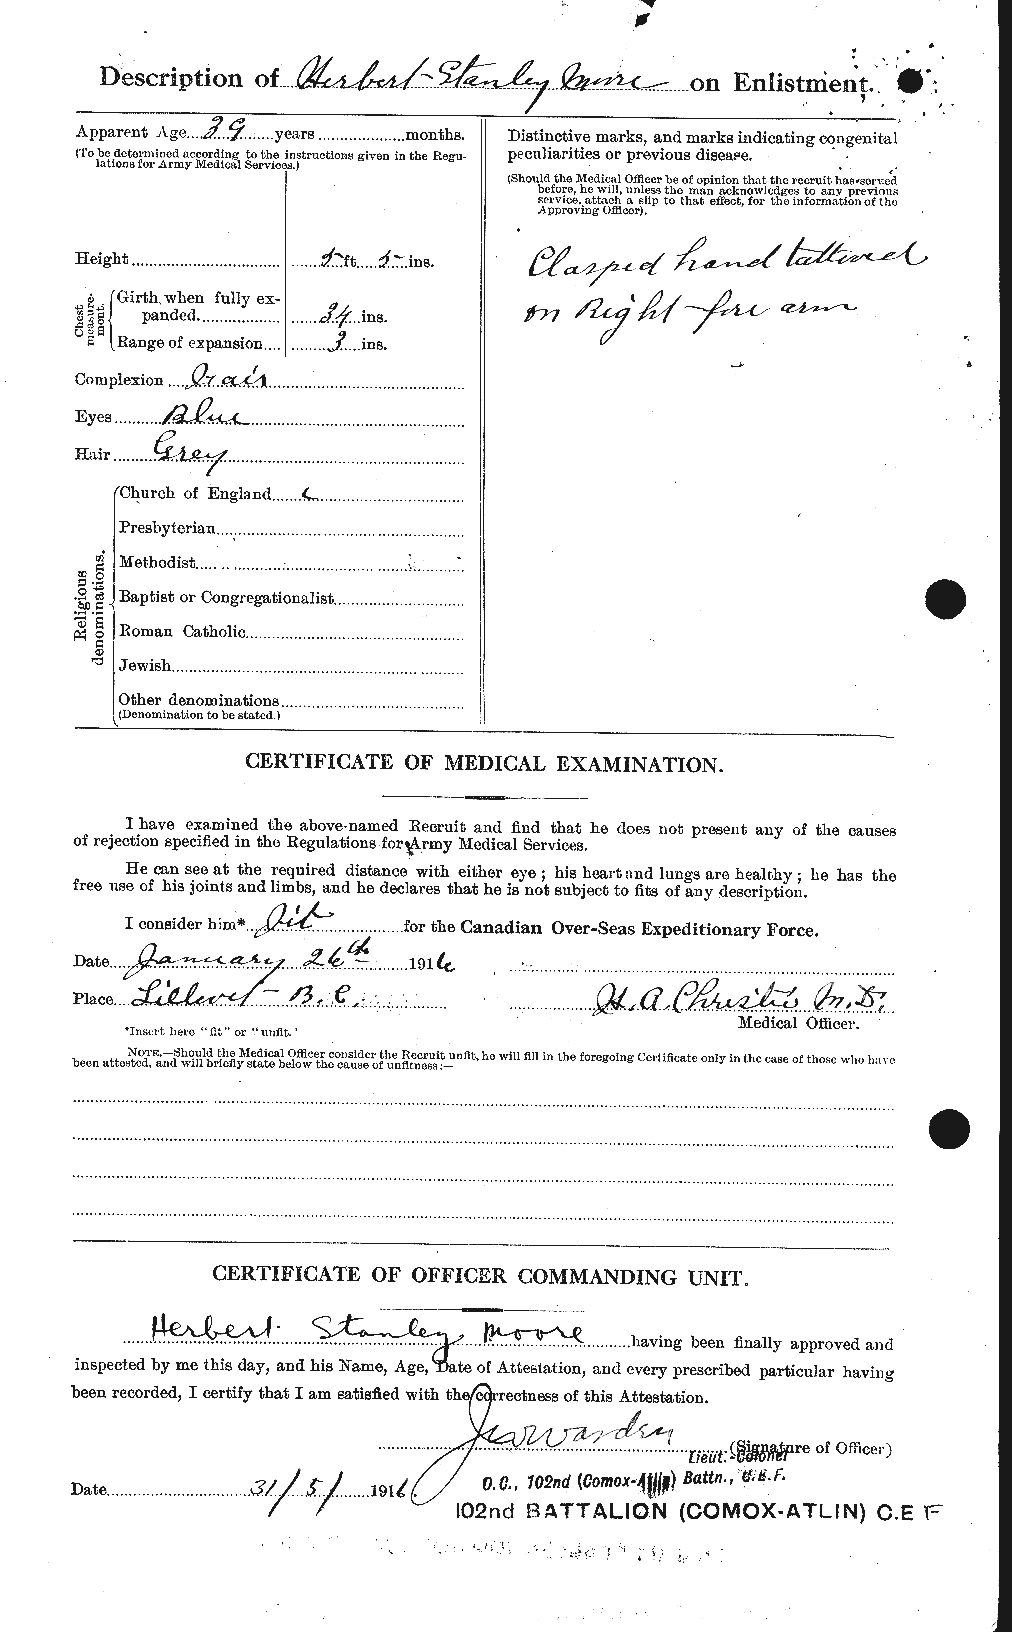 Personnel Records of the First World War - CEF 502126b